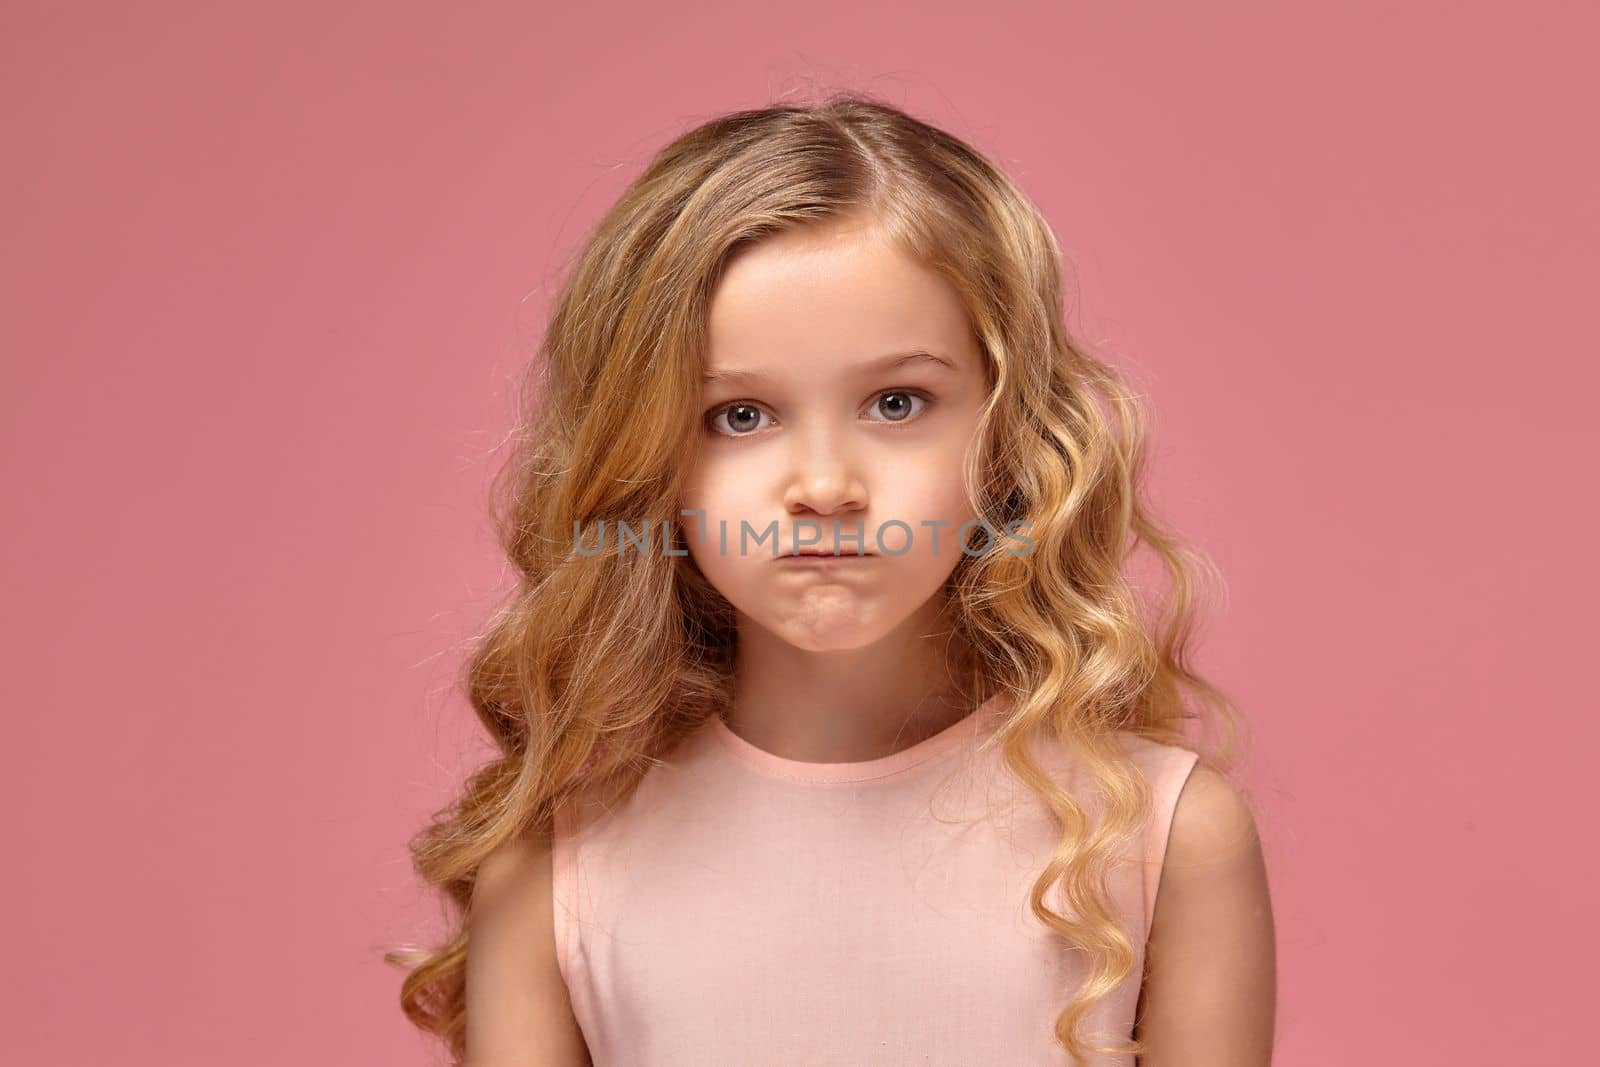 Pretty little girl with a blond curly hair, in a pink dress is posing for the camera and looking angry, on a pink background